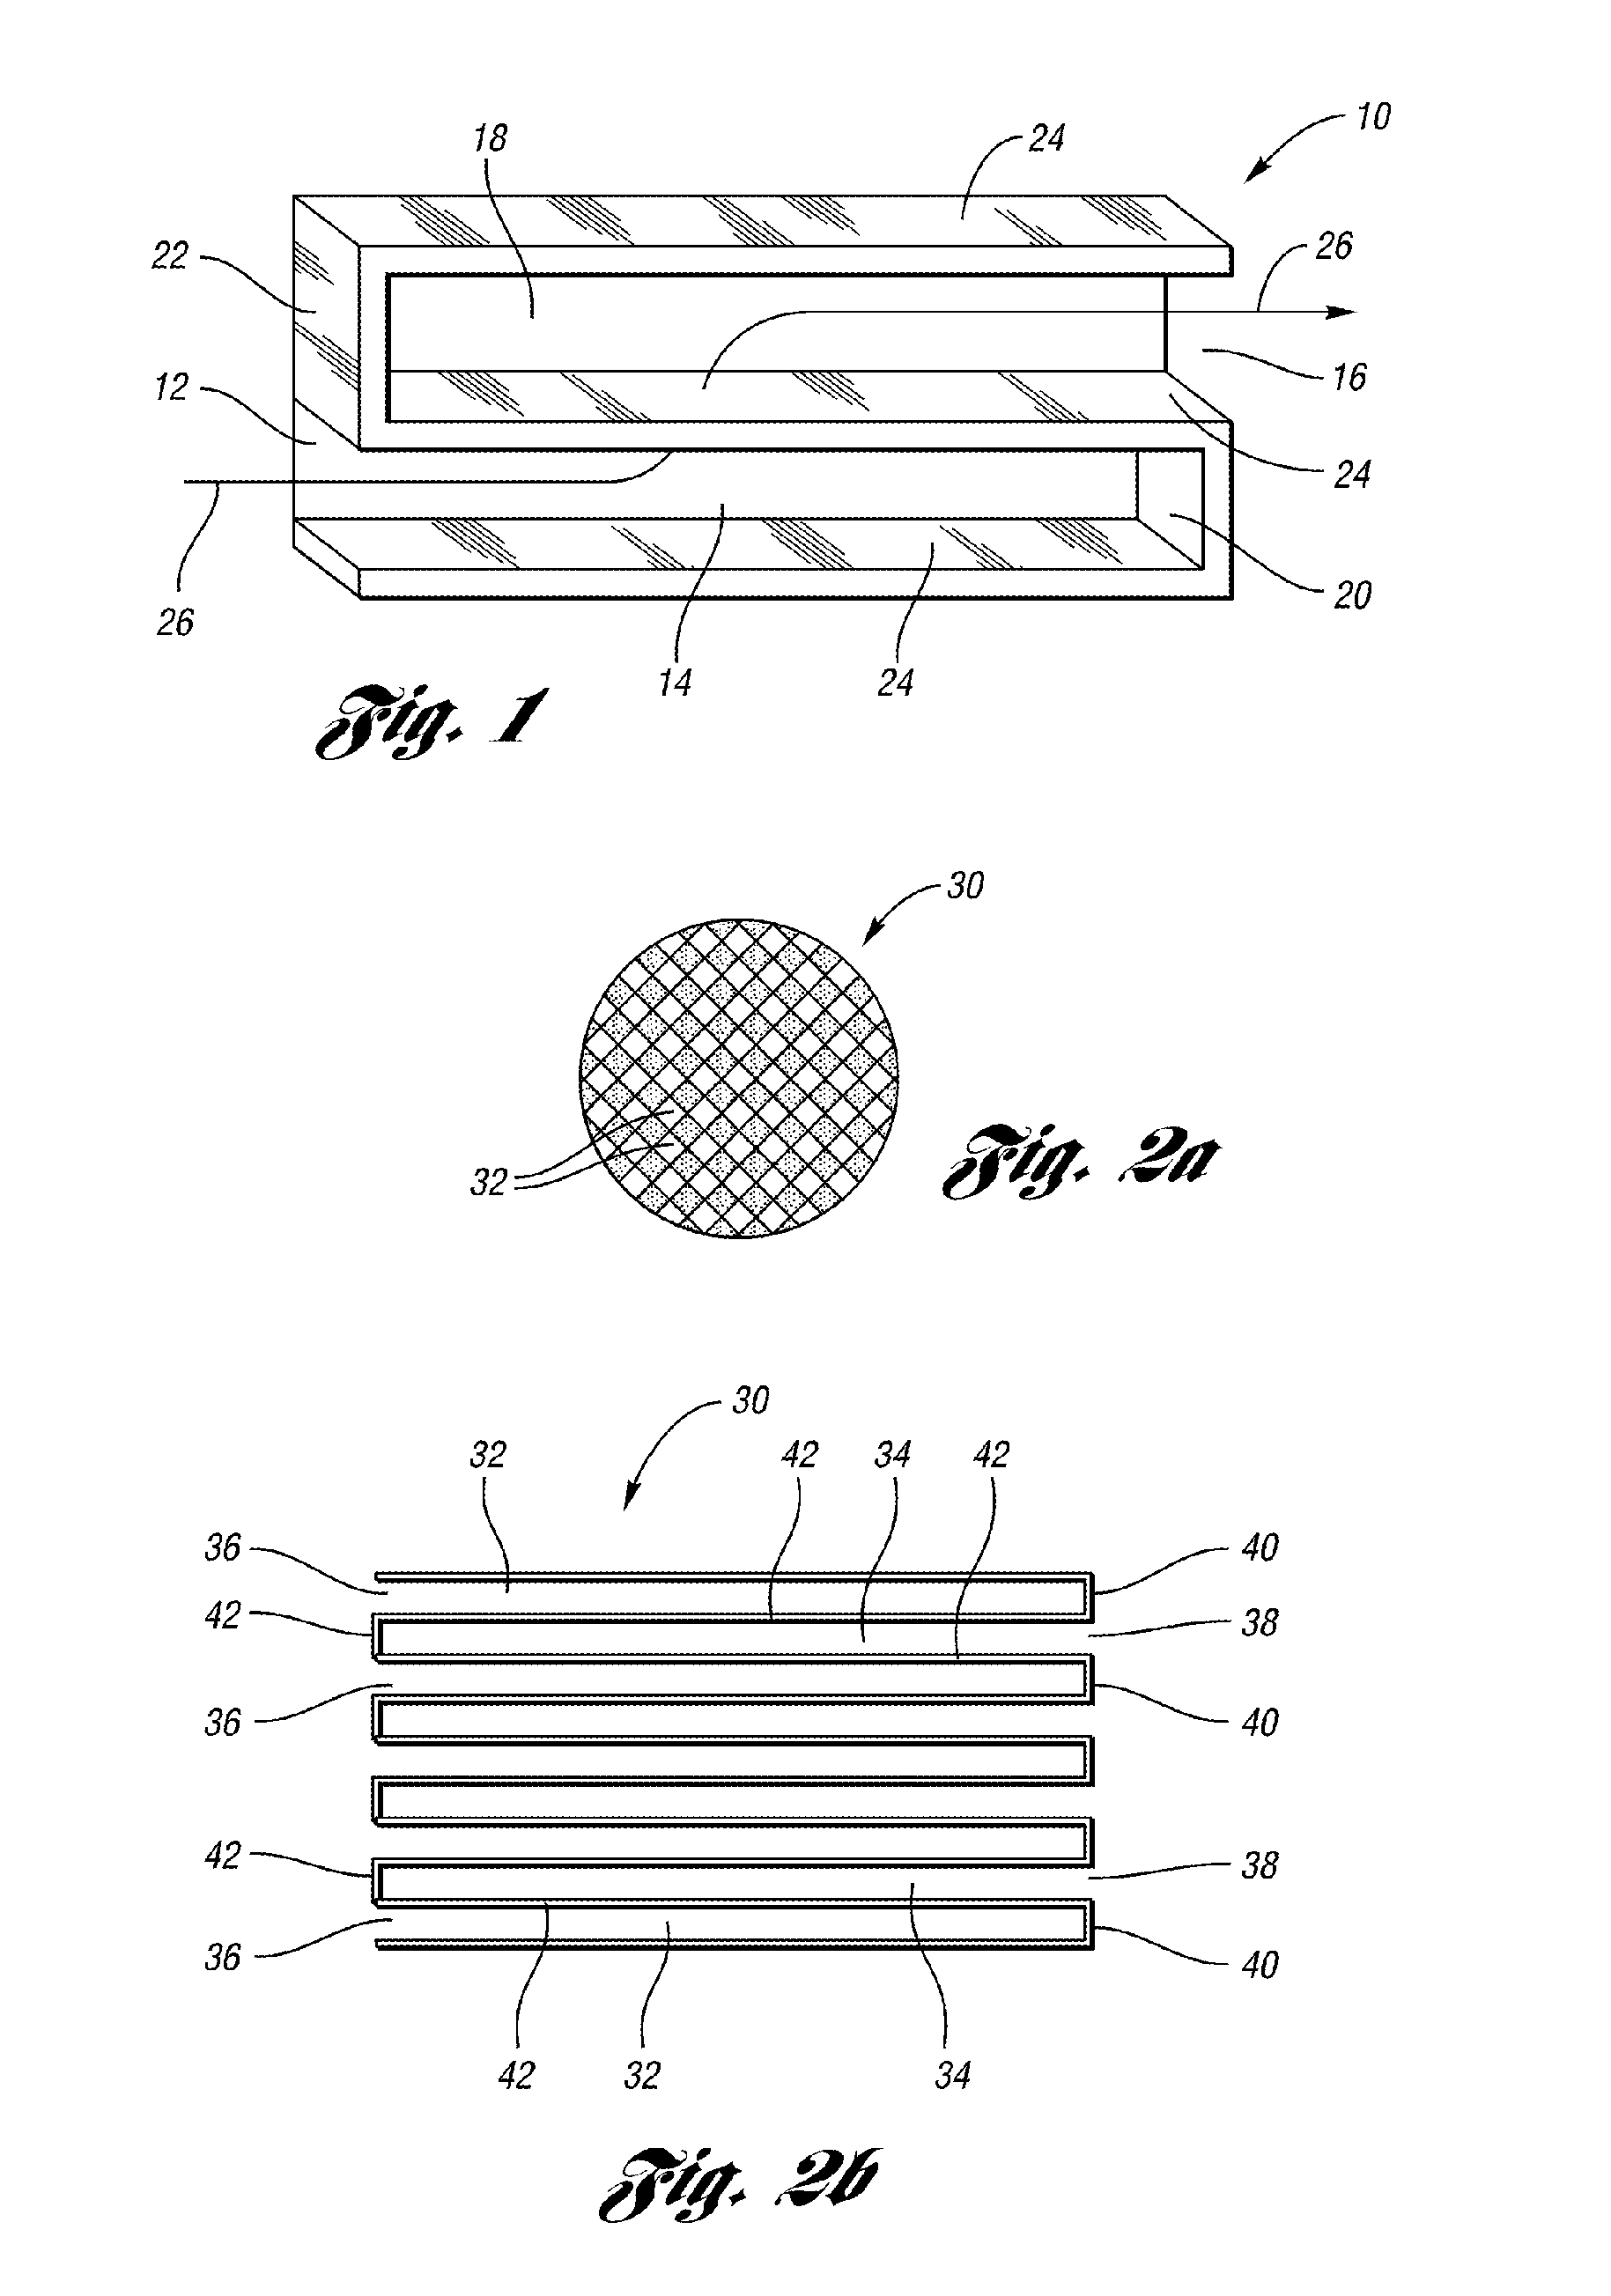 Diesel engine after treatment device for conversion of nitrogen oxide and particulate matter